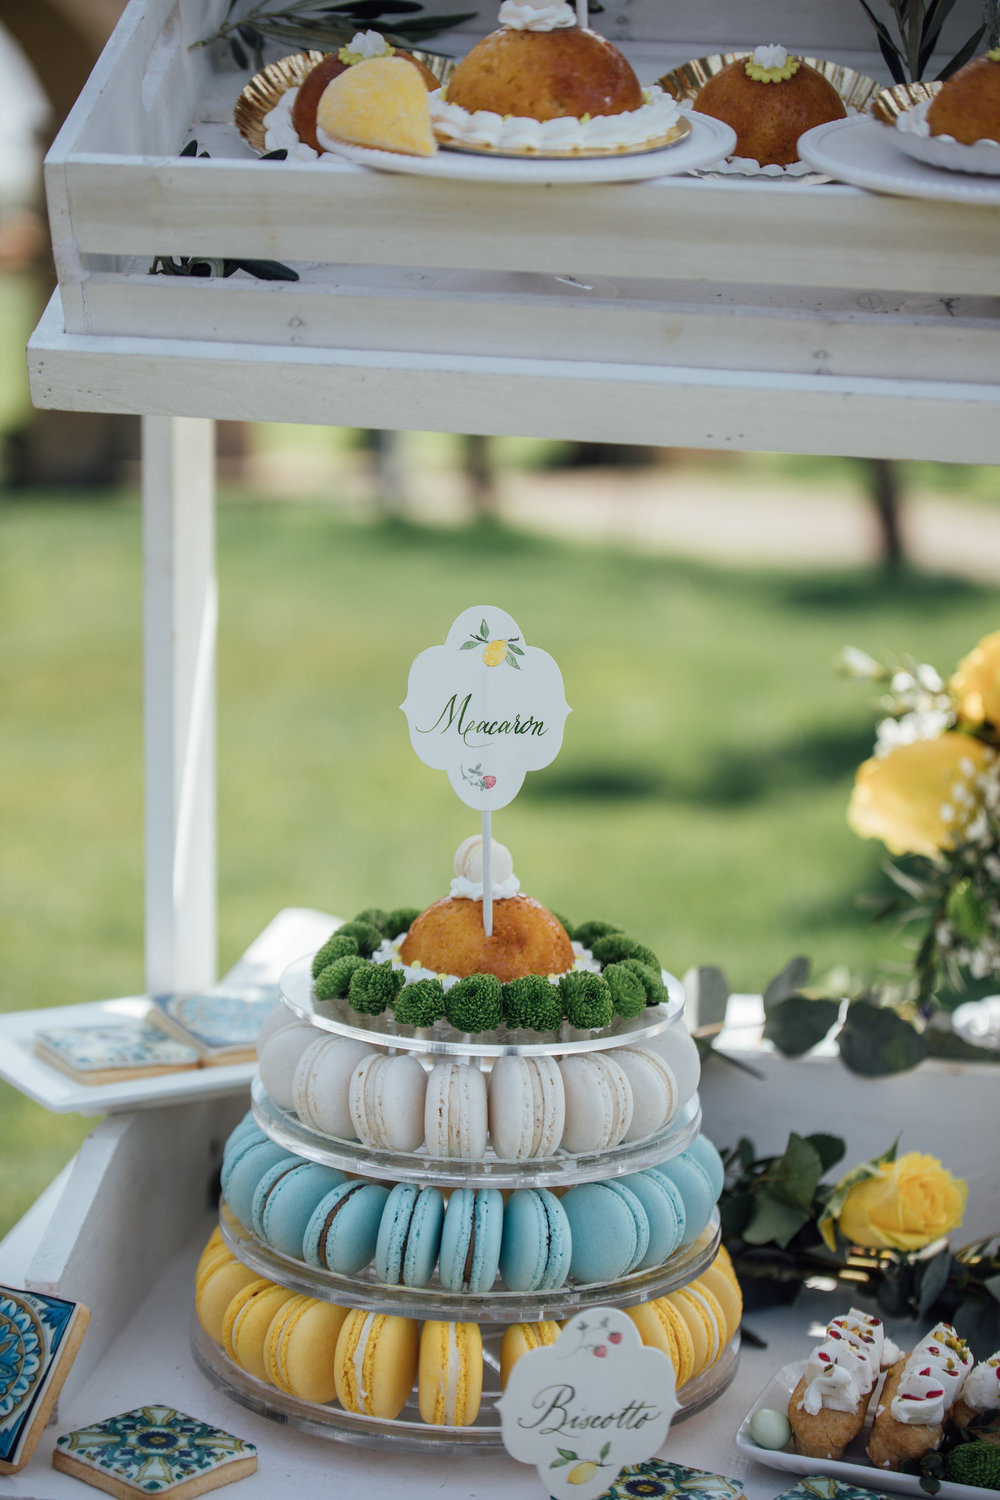  Macaron wedding cake tower from a Lemon Yellow Garden Wedding Styled Shoot in Rome Italy - by Jess Palatucci Photography - as seen on www.BrendasWeddingBlog.com 